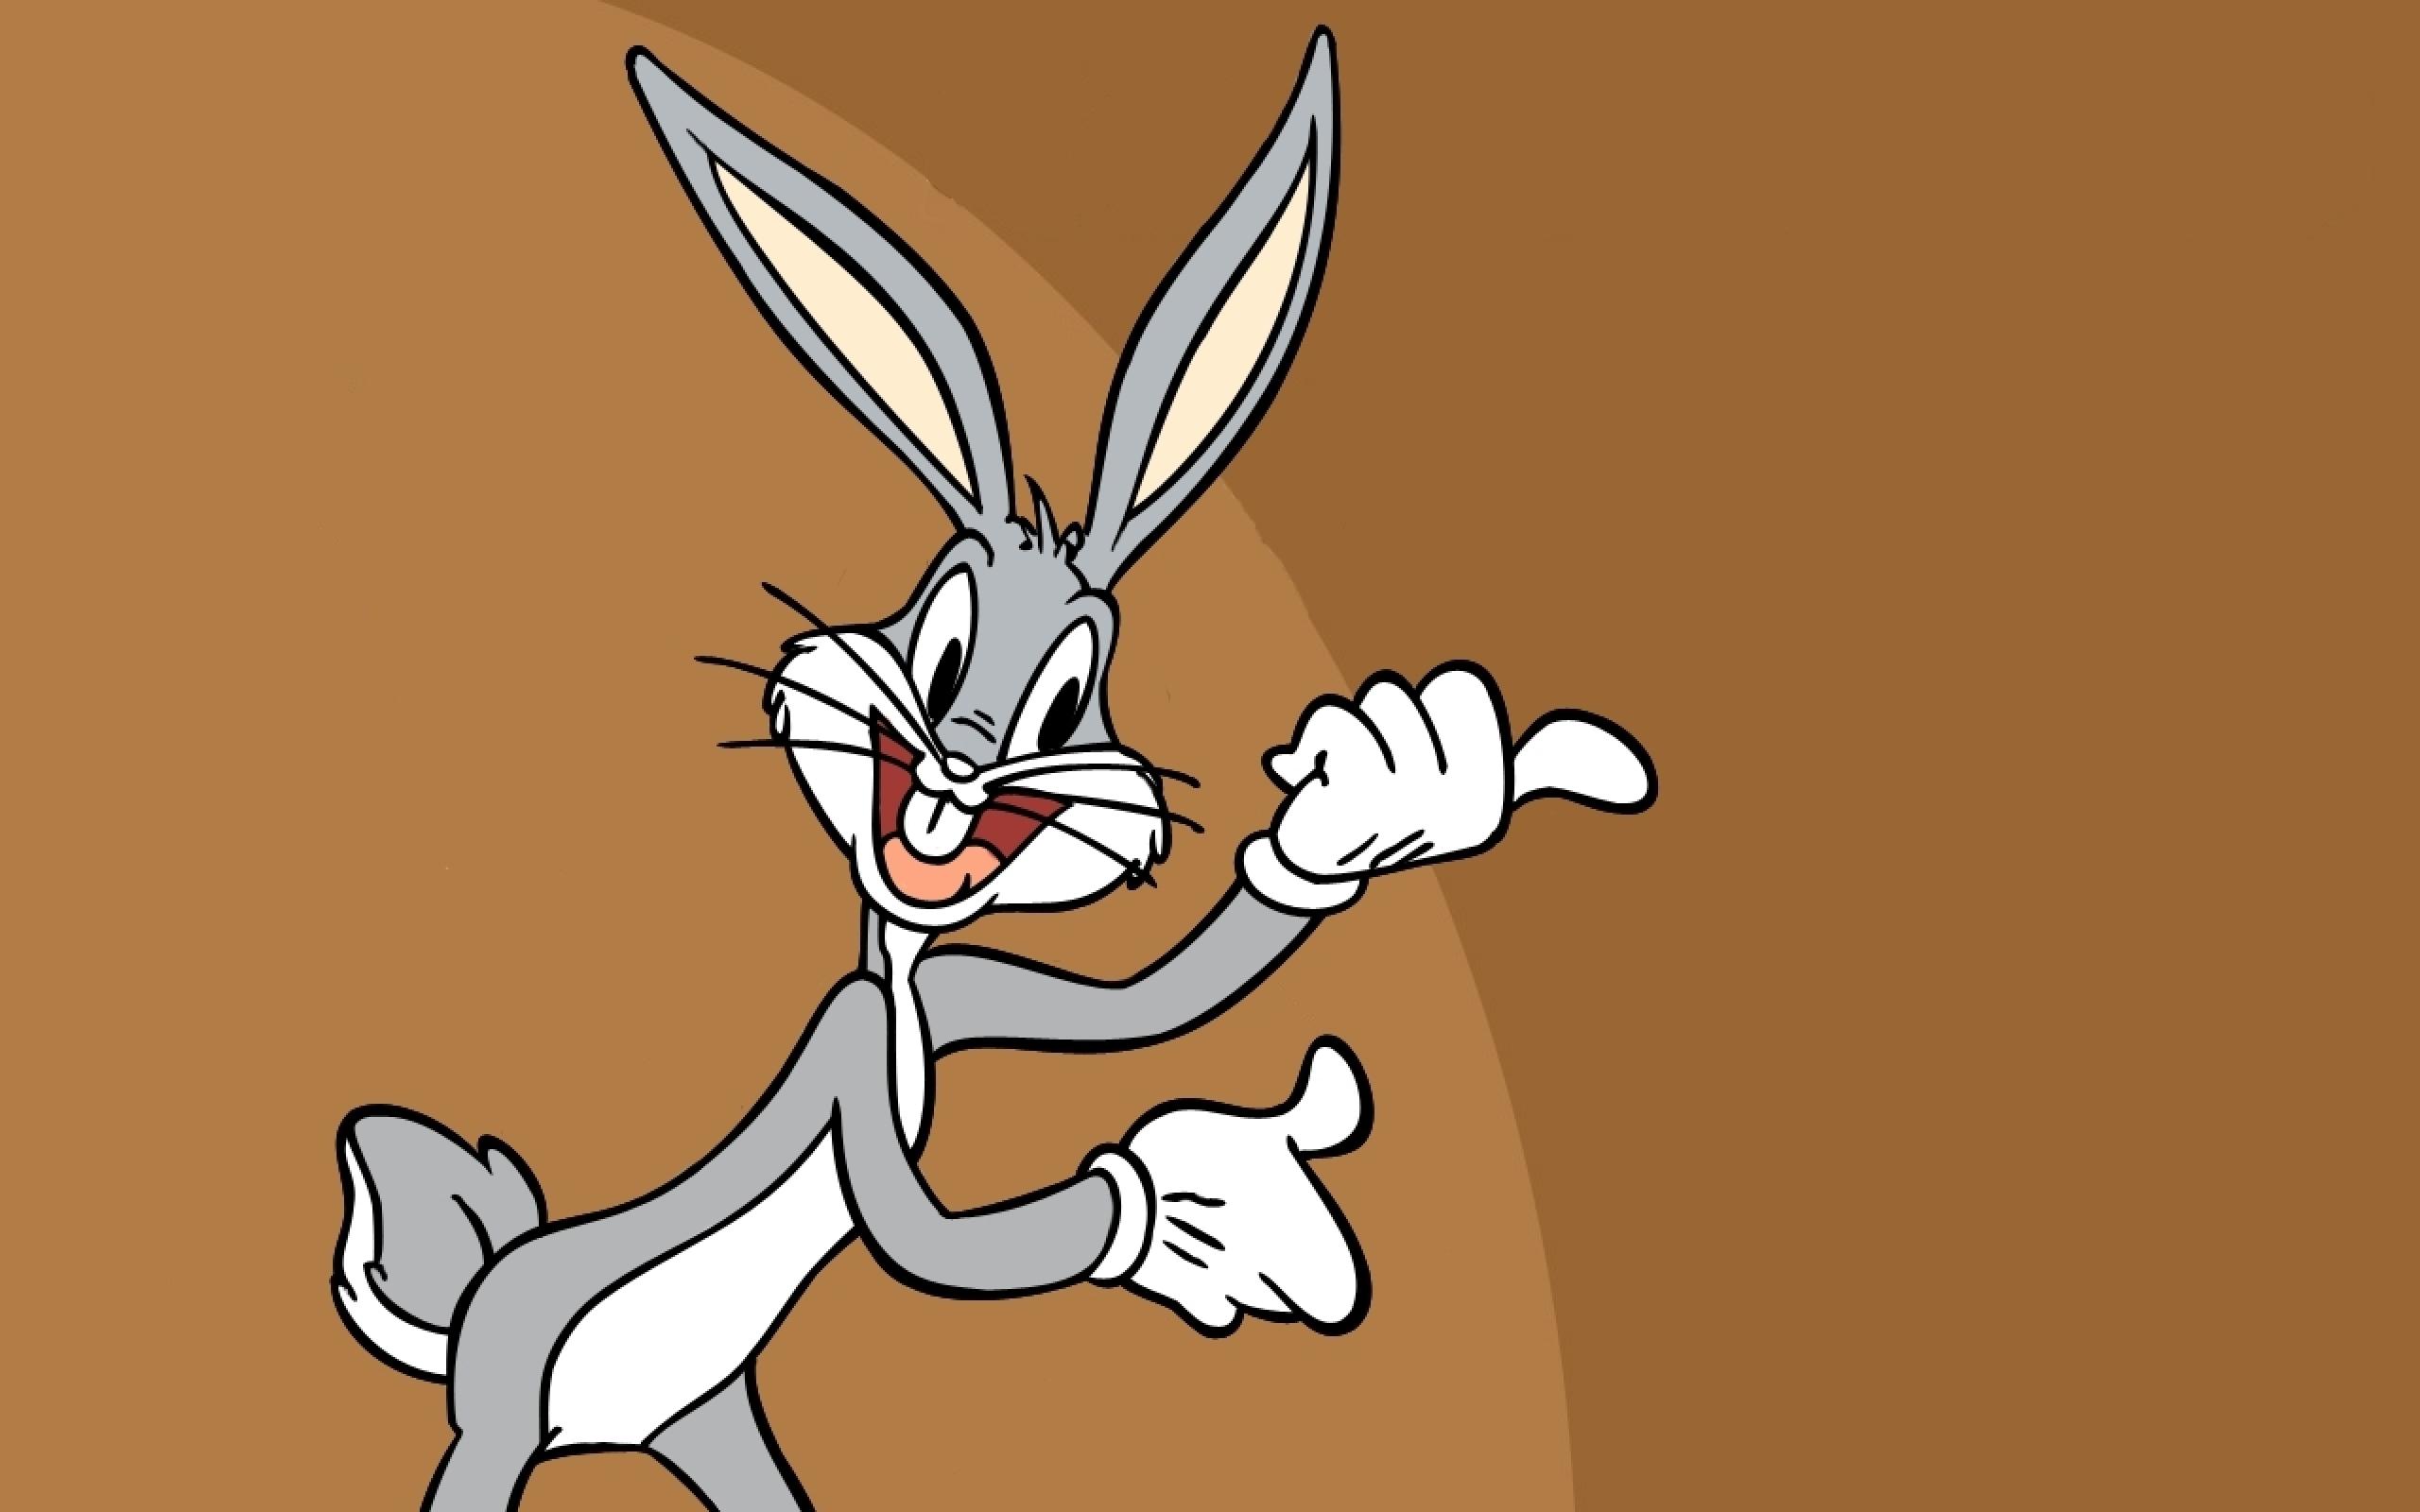 Bugs Bunny is a fictional character in the Looney Tunes and Merrie Melodies theatrical cartoon series produced by Warner Bros. - Bugs Bunny